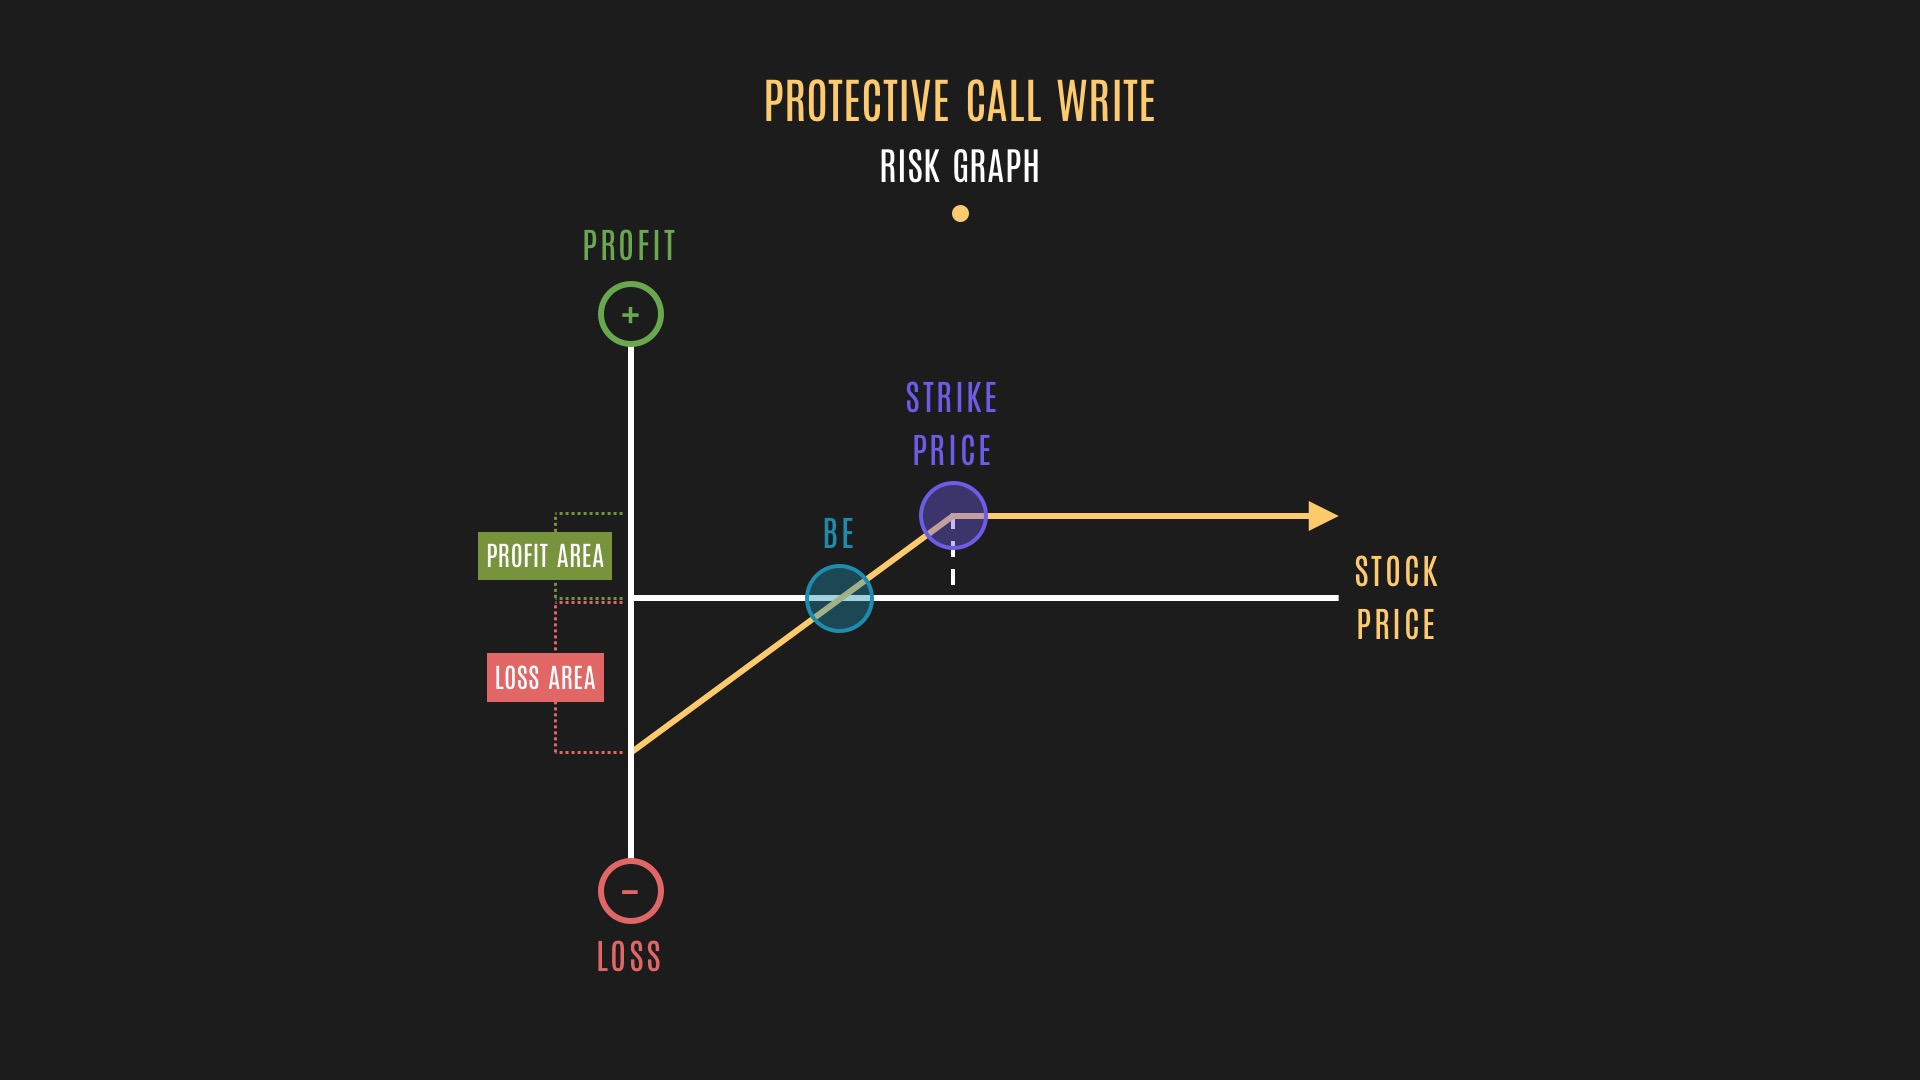 Tackle Today: Selling ITM calls is awesome! (Protective Call Write Risk Graph)